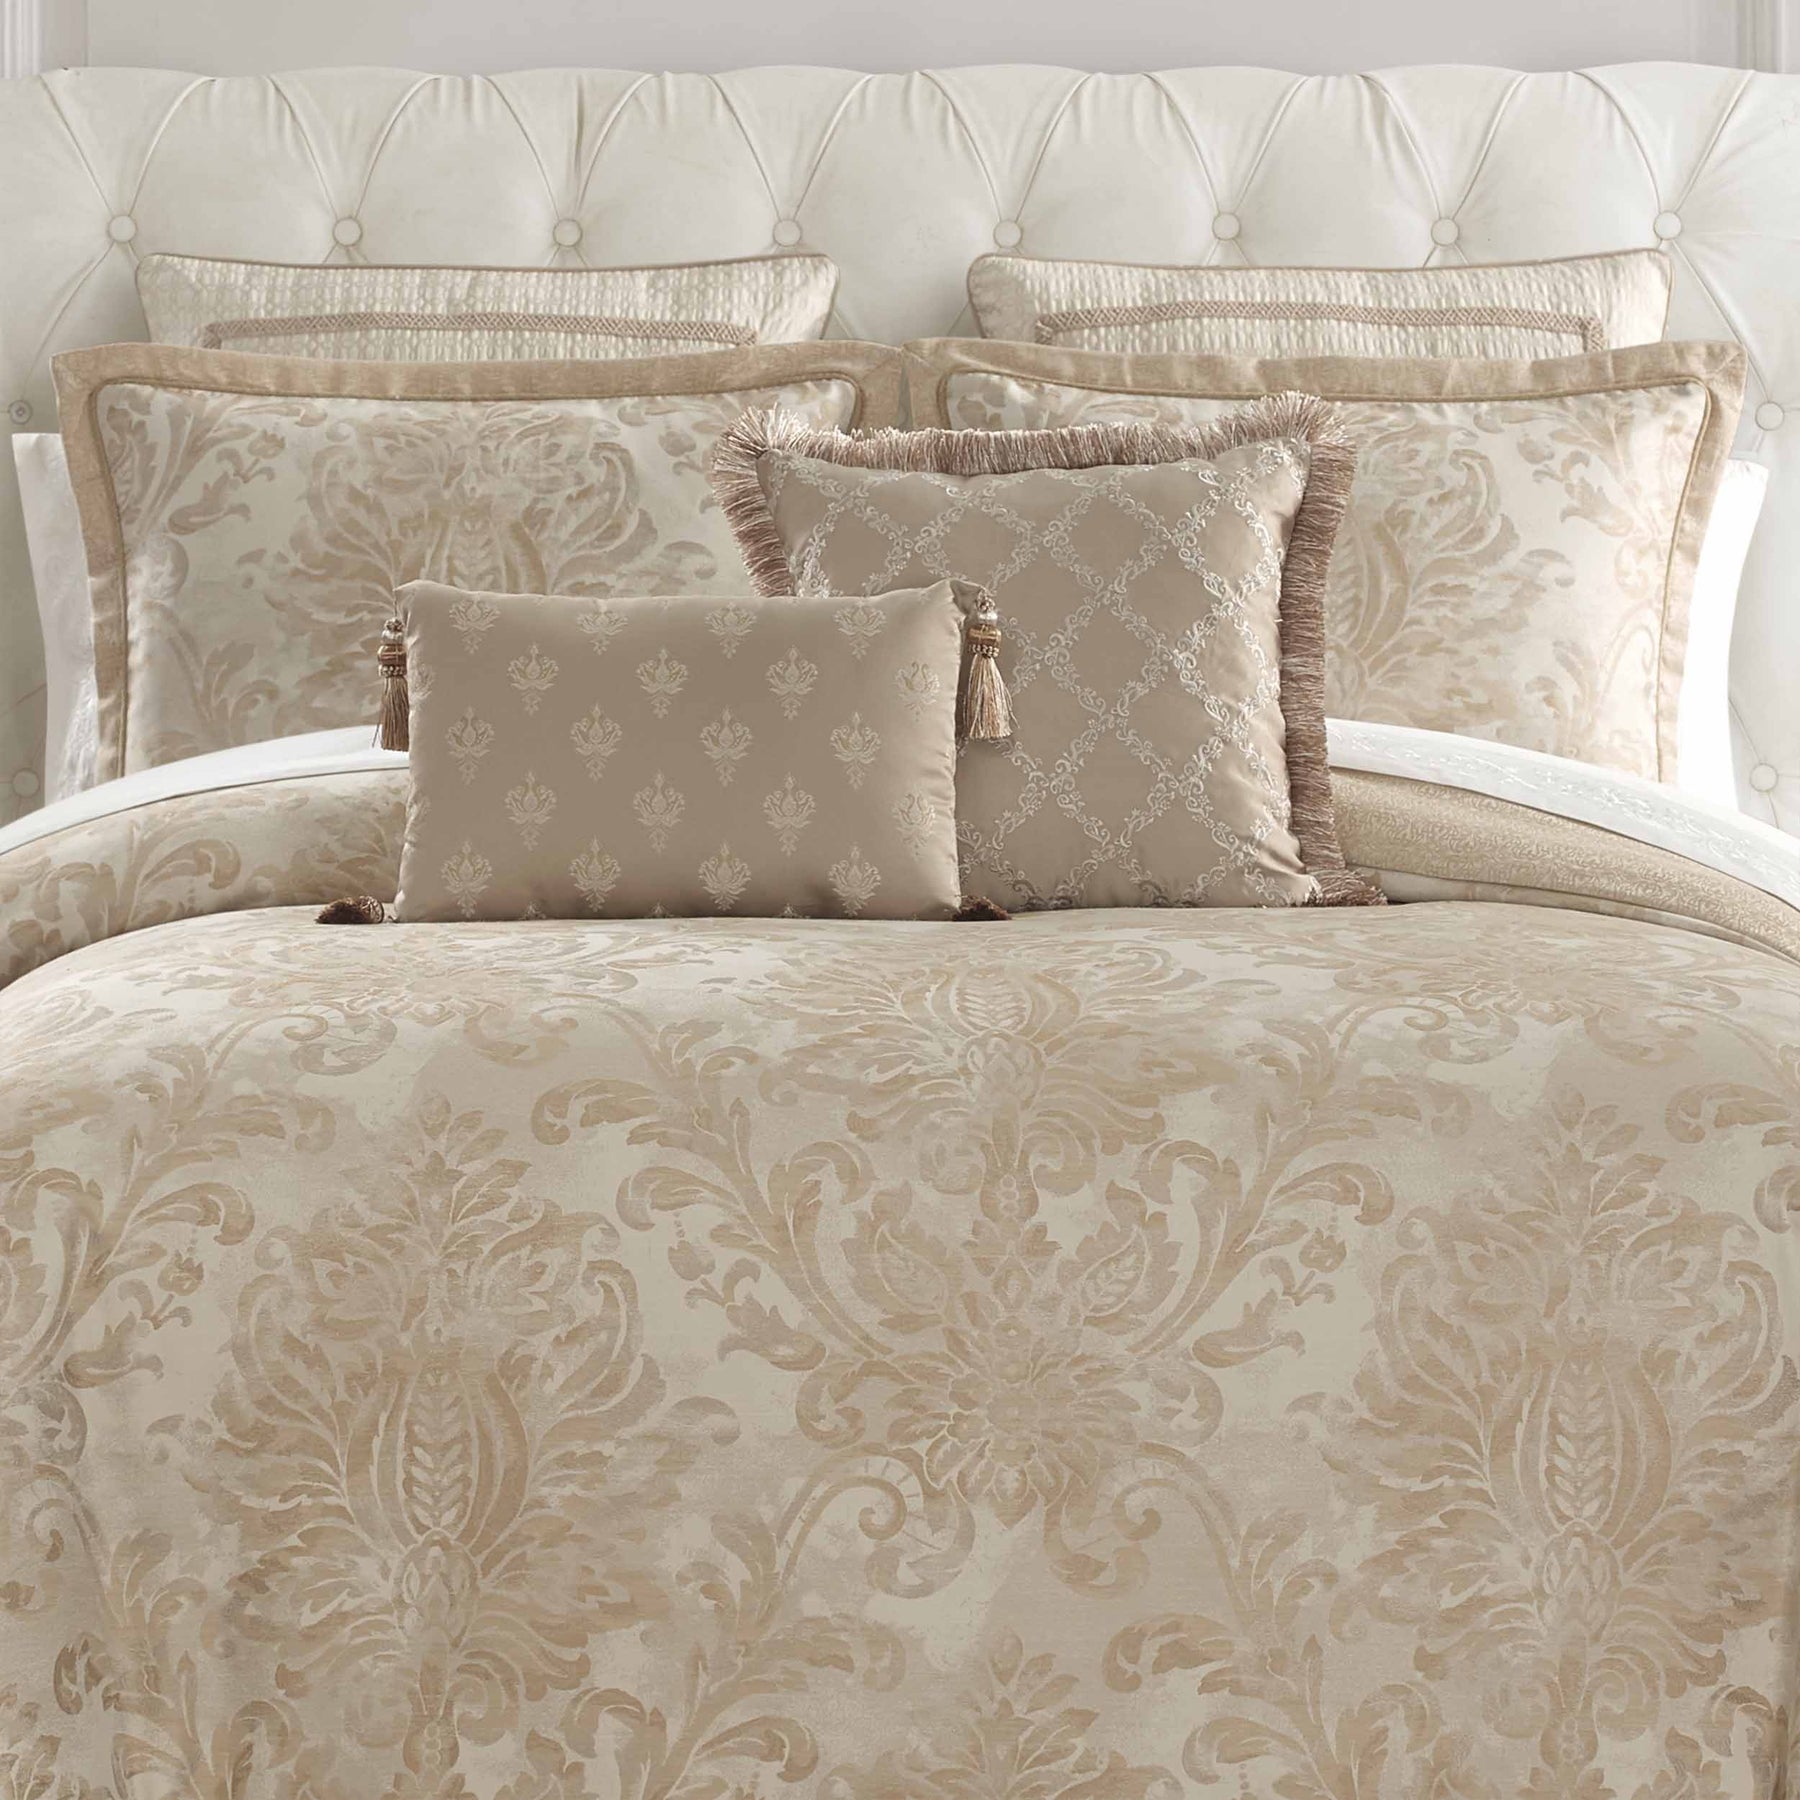 Waterford Annalise Gold Decorative Throw Pillow Set of 2 – Latest Bedding